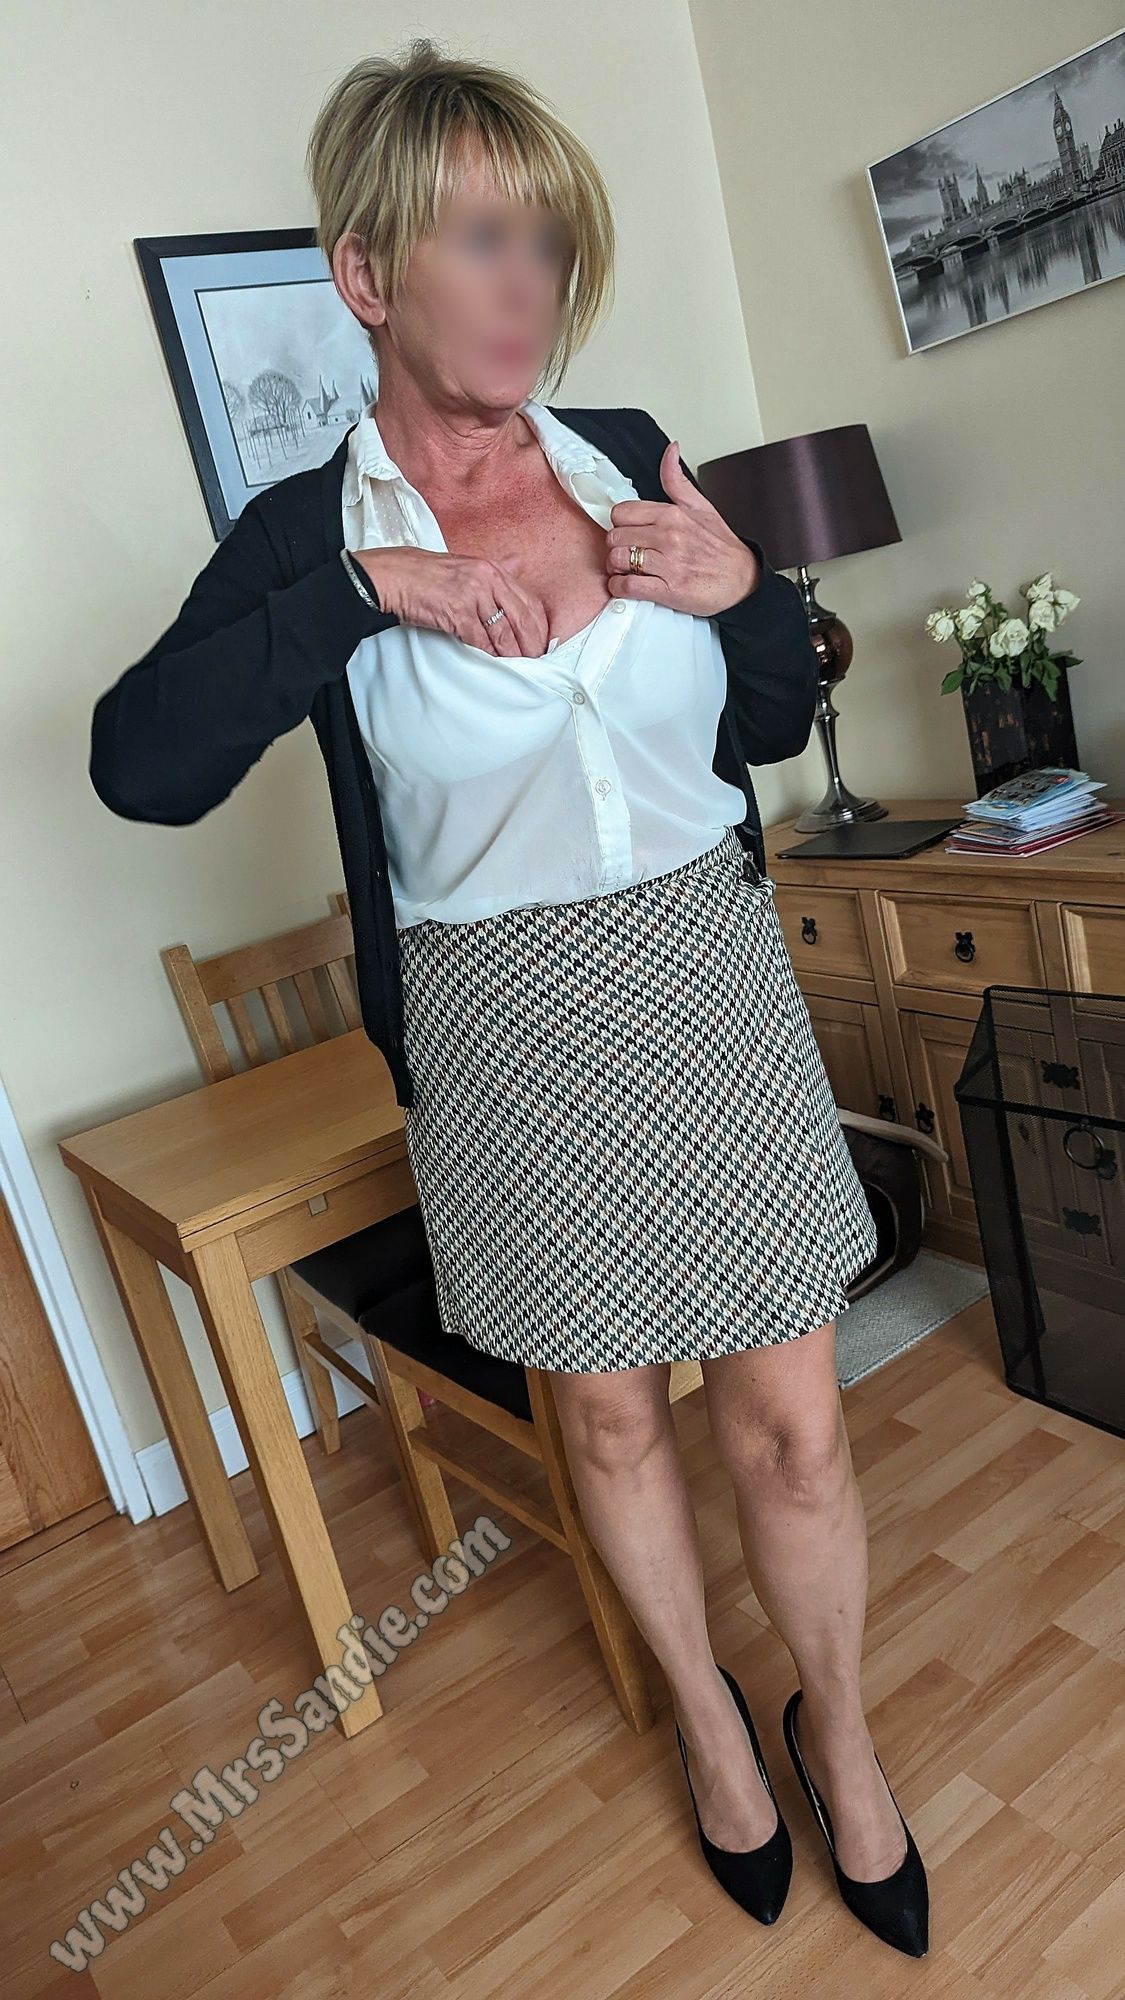 Ready for work in skirt, blouse, pantyhose and heels. #2